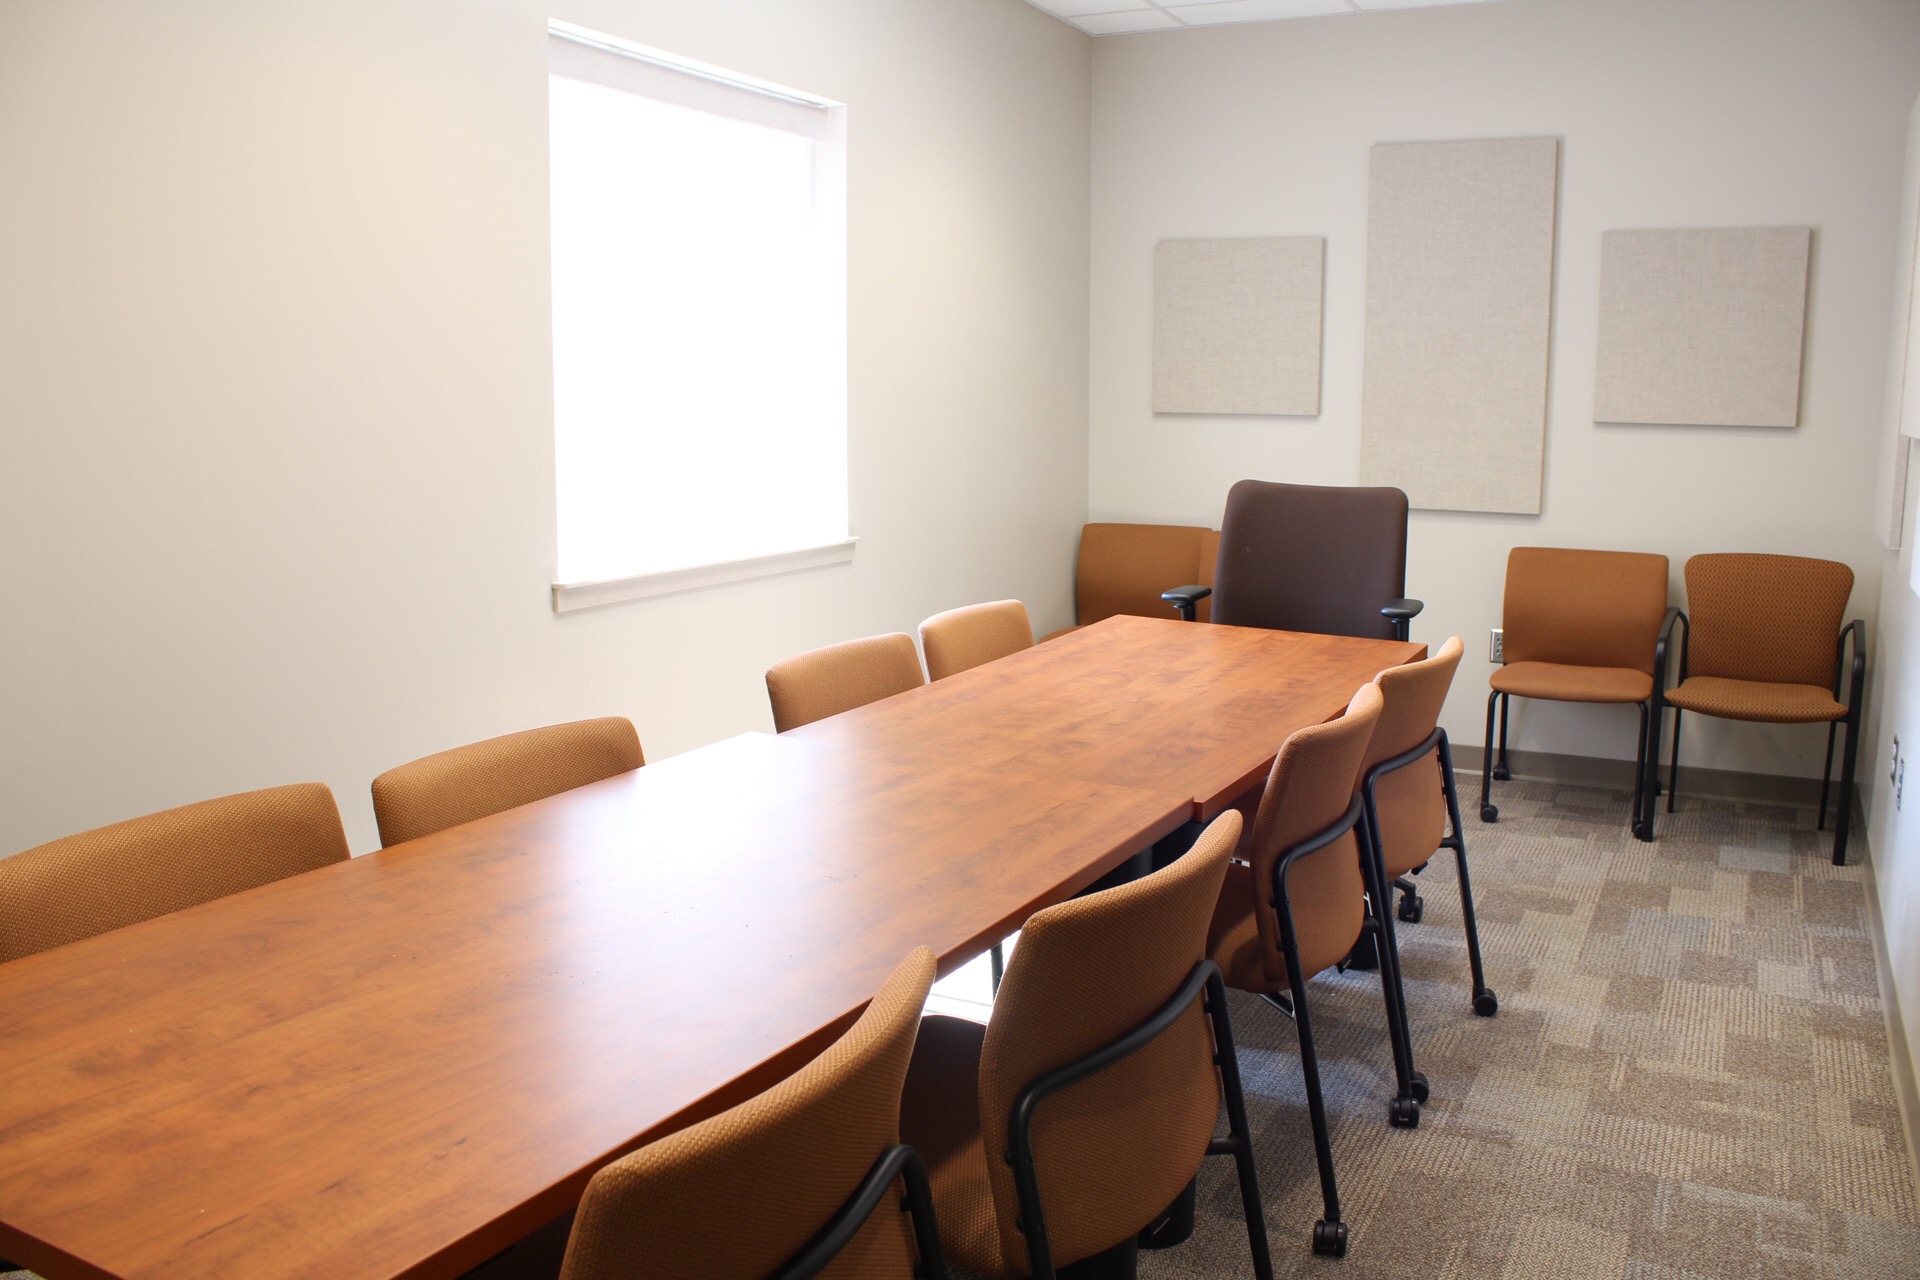 Jindra Conference Room showing 2 tables, and additional seating.